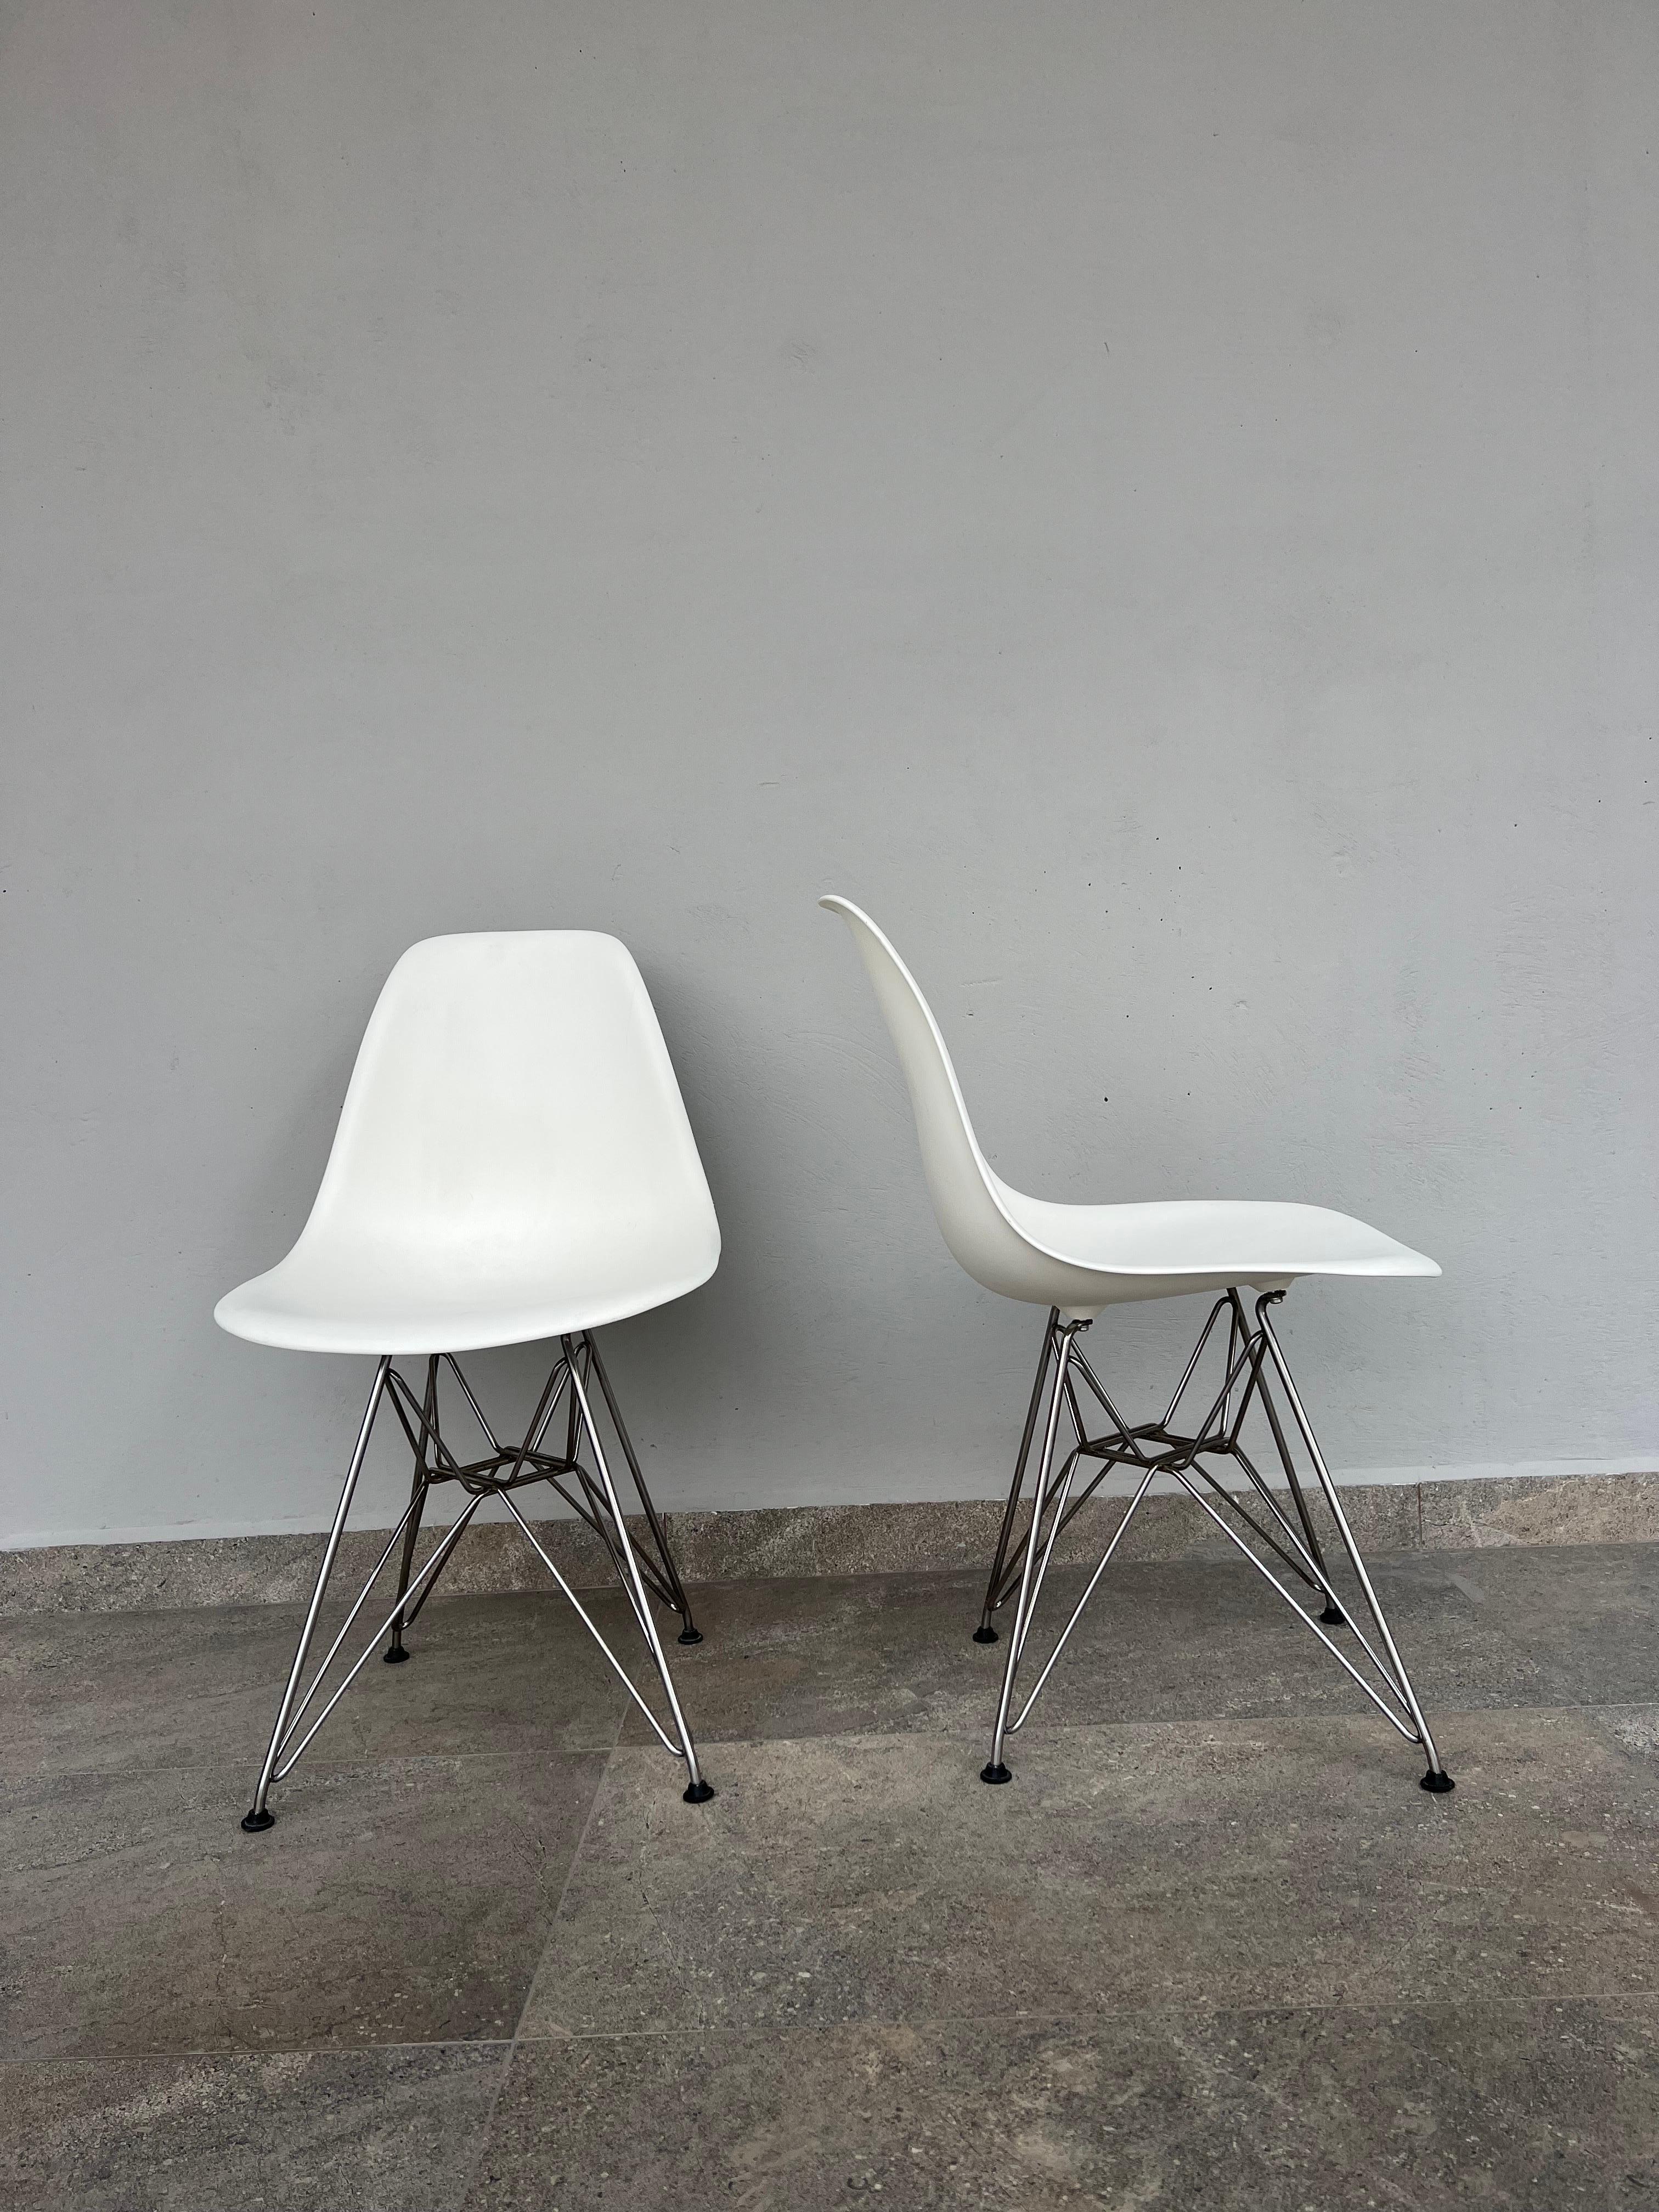 Pair of Eames Molded White Plastic Chairs with Eiffel Tower Bases For Sale 2